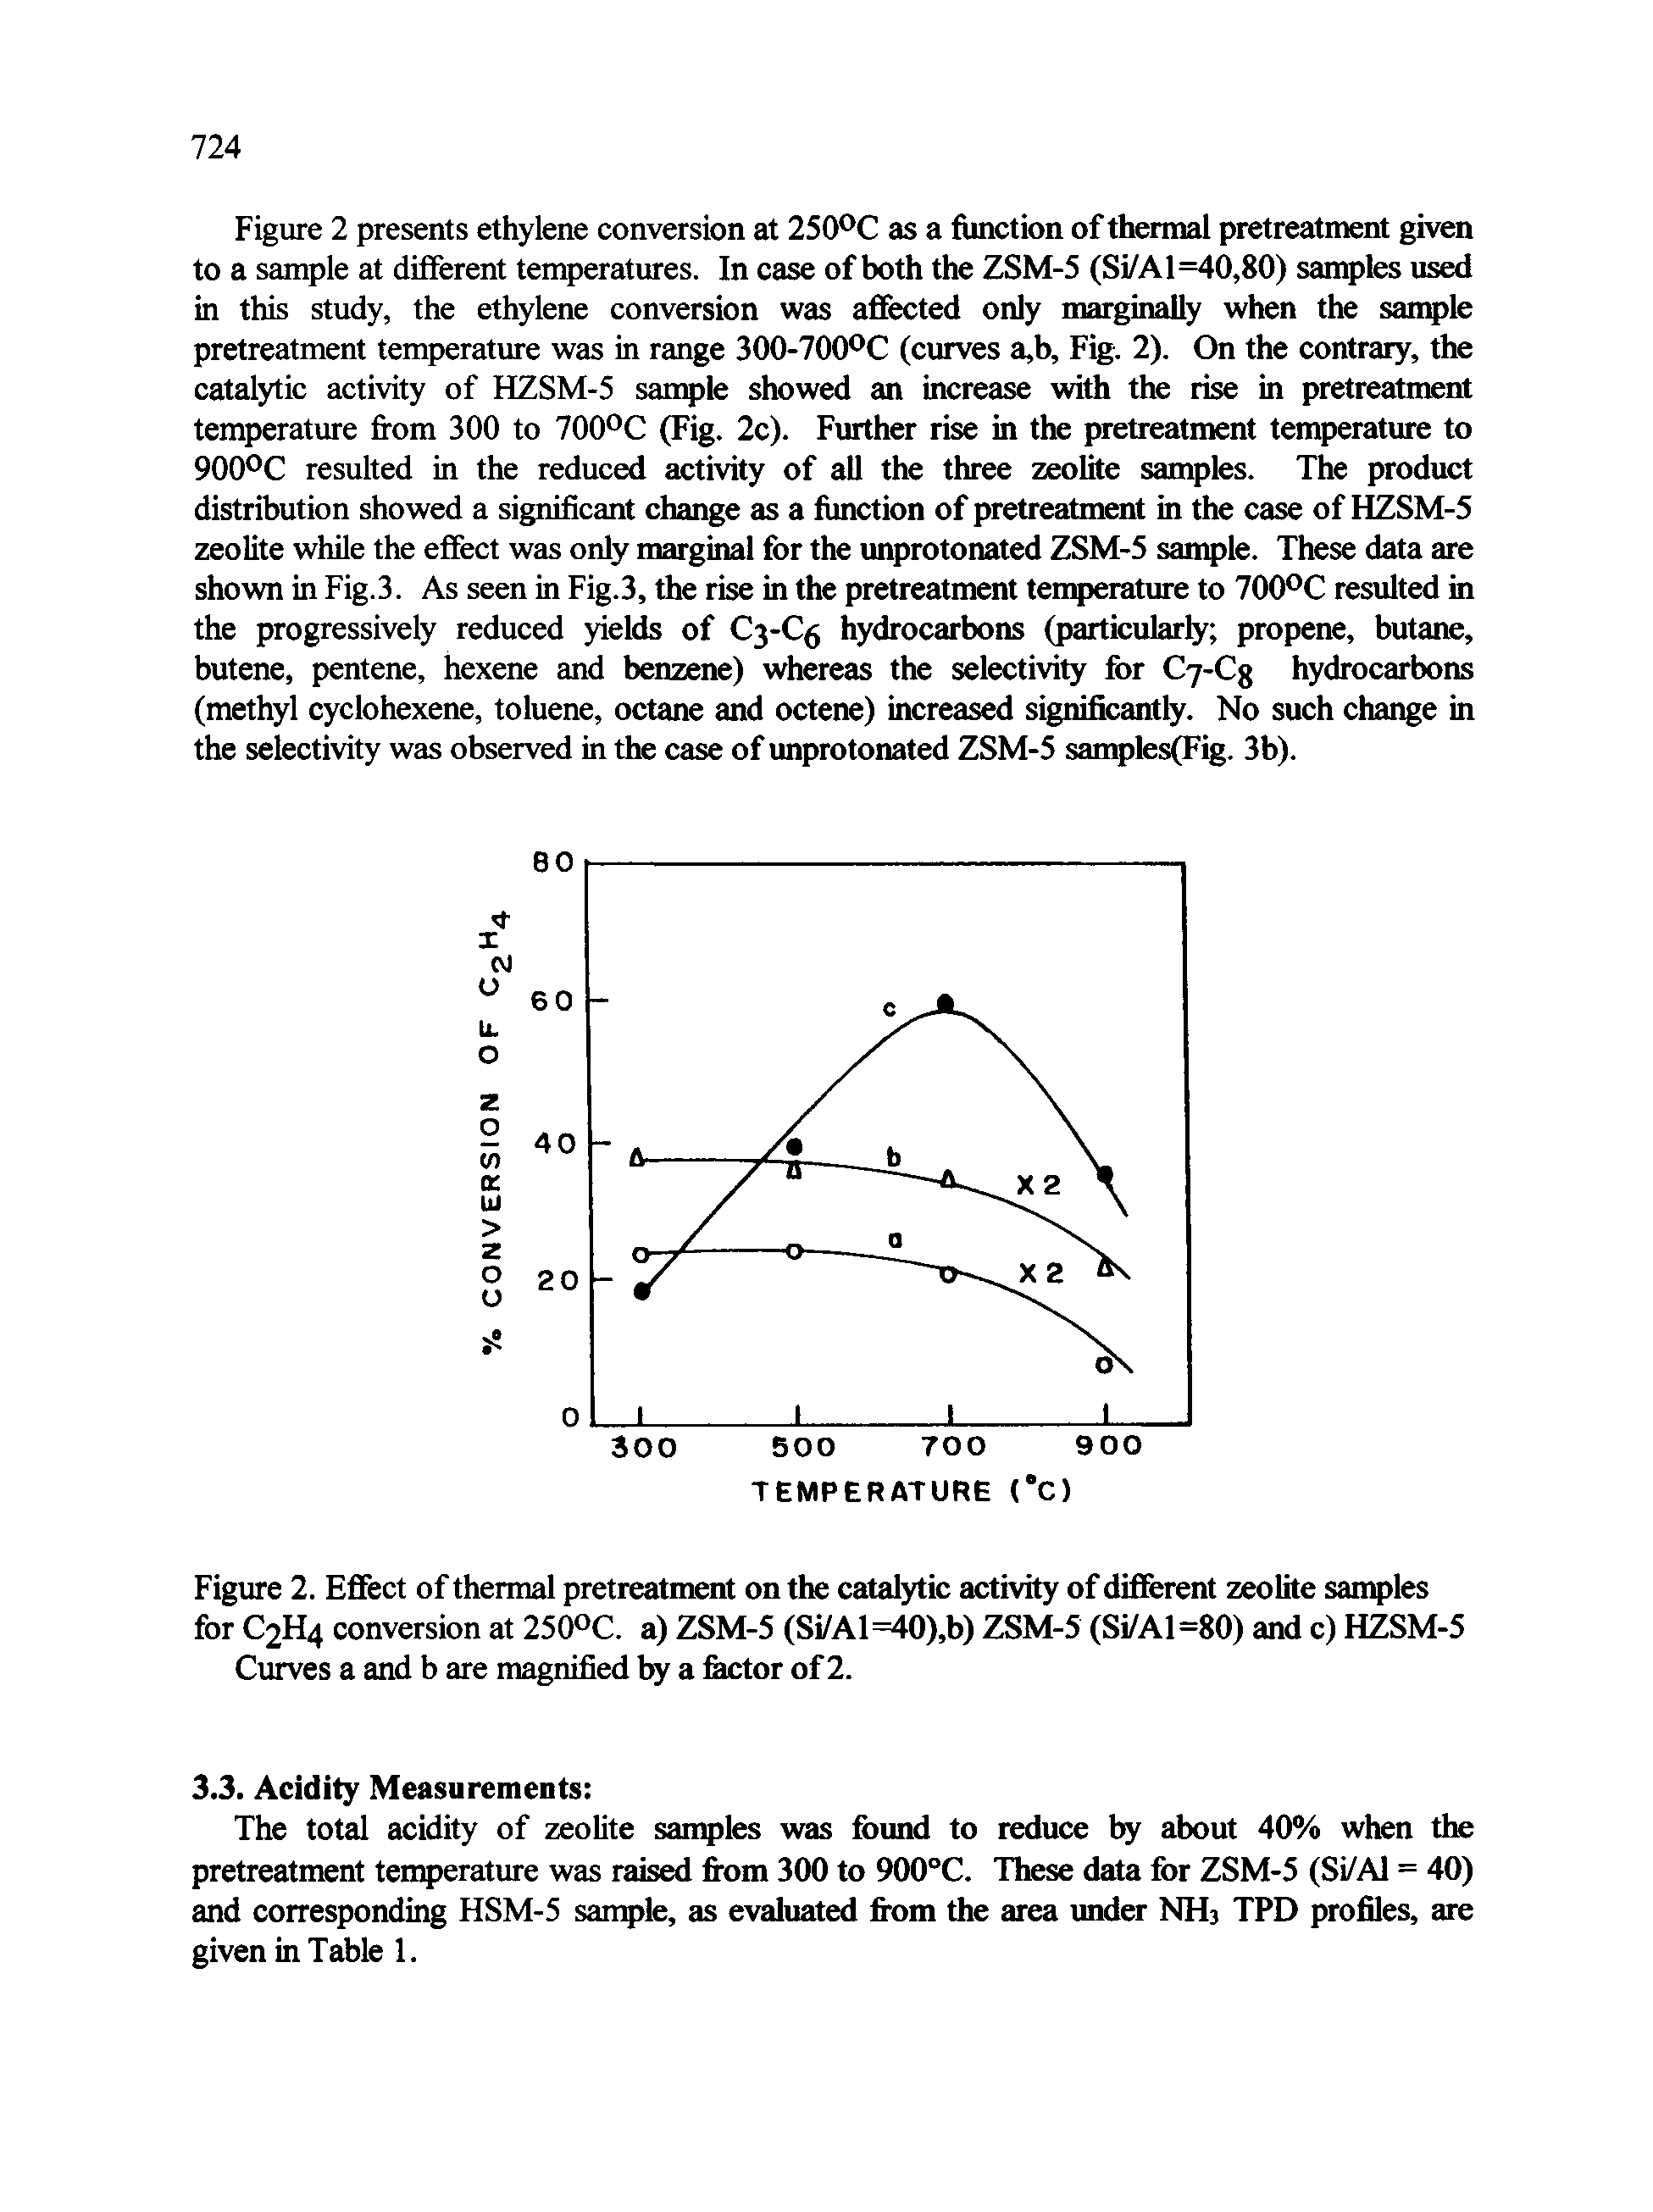 Figure 2. Effect of thermal pretreatment on the catalytic activity of different zeolite samples for C2H4 conversion at 25QOC. a) ZSM-5 (Si/Al=40),b) ZSM-5 (Si/Al=80) and c) HZSM-5 Curves a and b are magnified by a fector of 2.